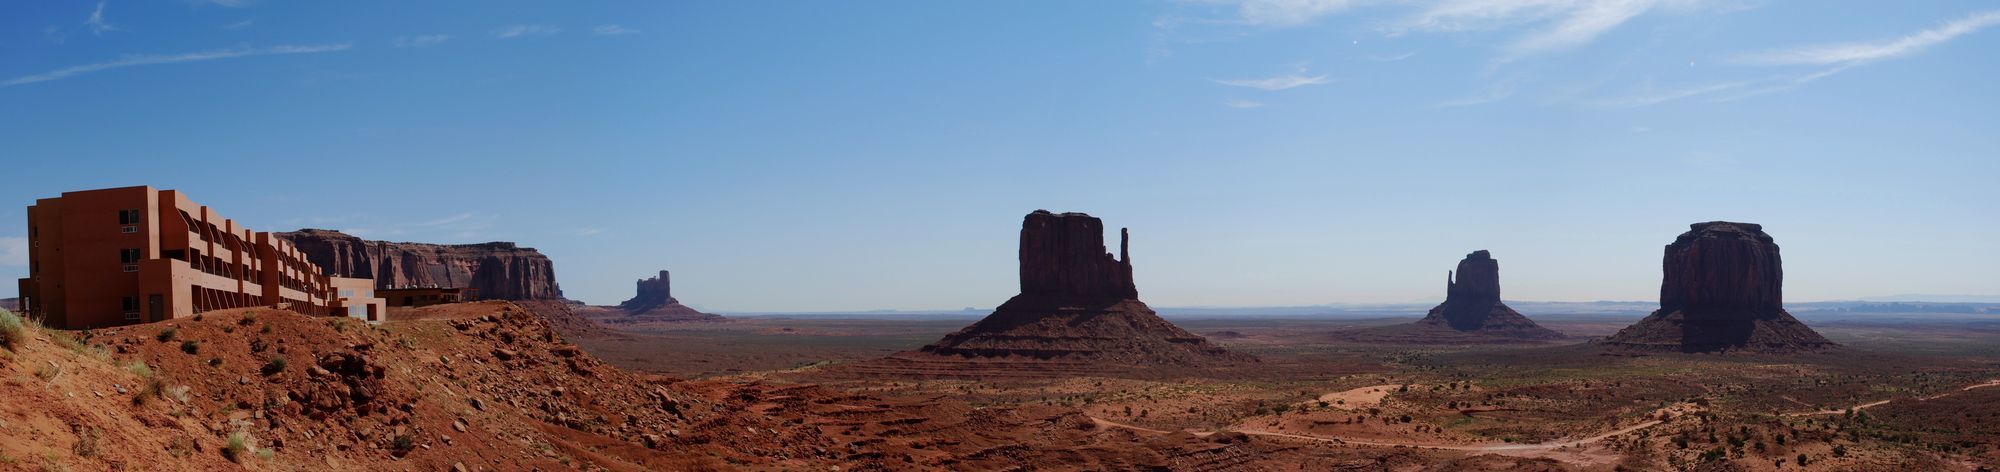 The View Hotel Monument Valley Exterior foto